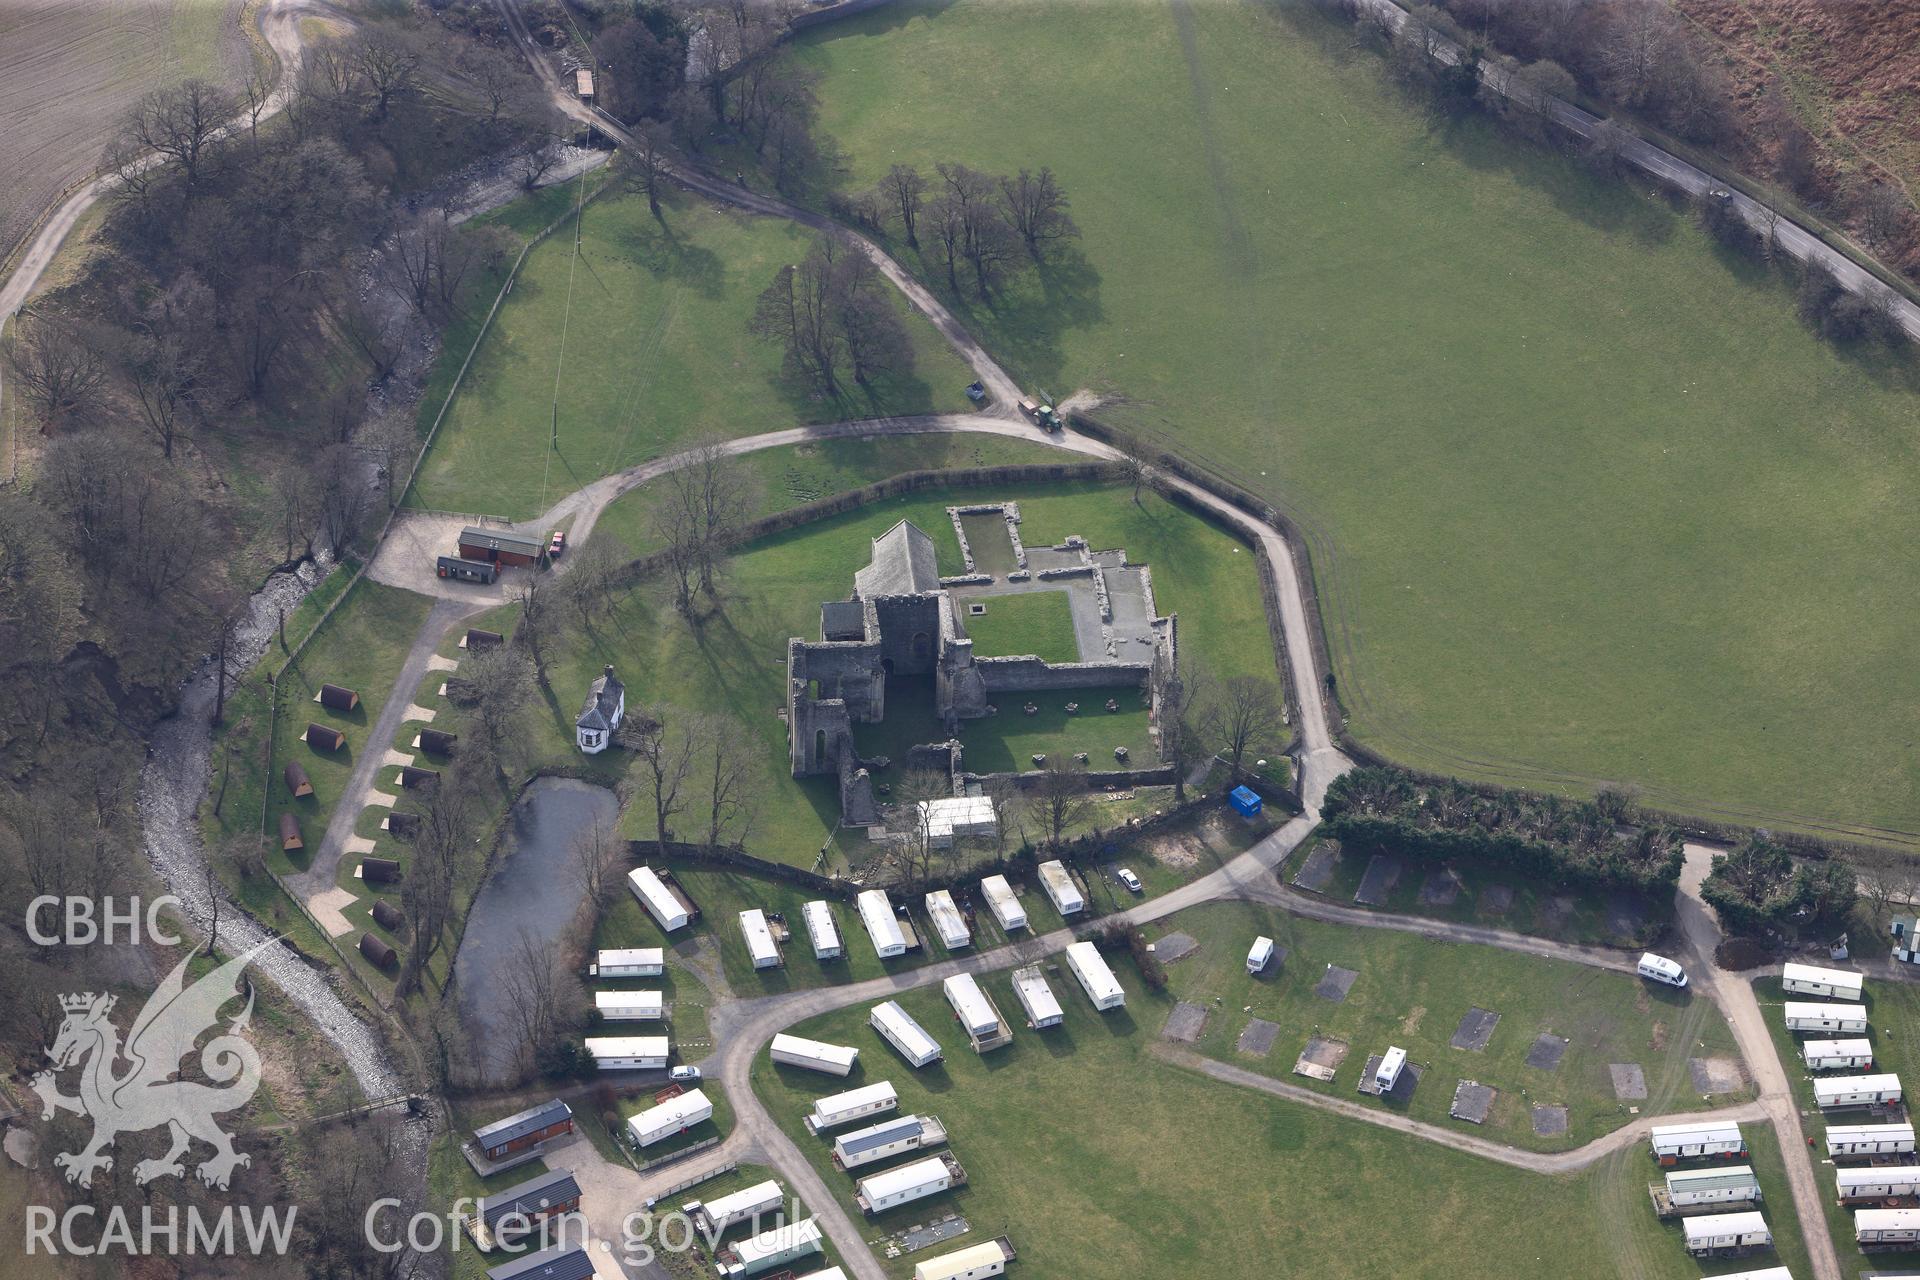 Vale Crucis Abbey and the small cottage nearby (the buildings next to the pond). Oblique aerial photograph taken during the Royal Commission?s programme of archaeological aerial reconnaissance by Toby Driver on 28th February 2013.